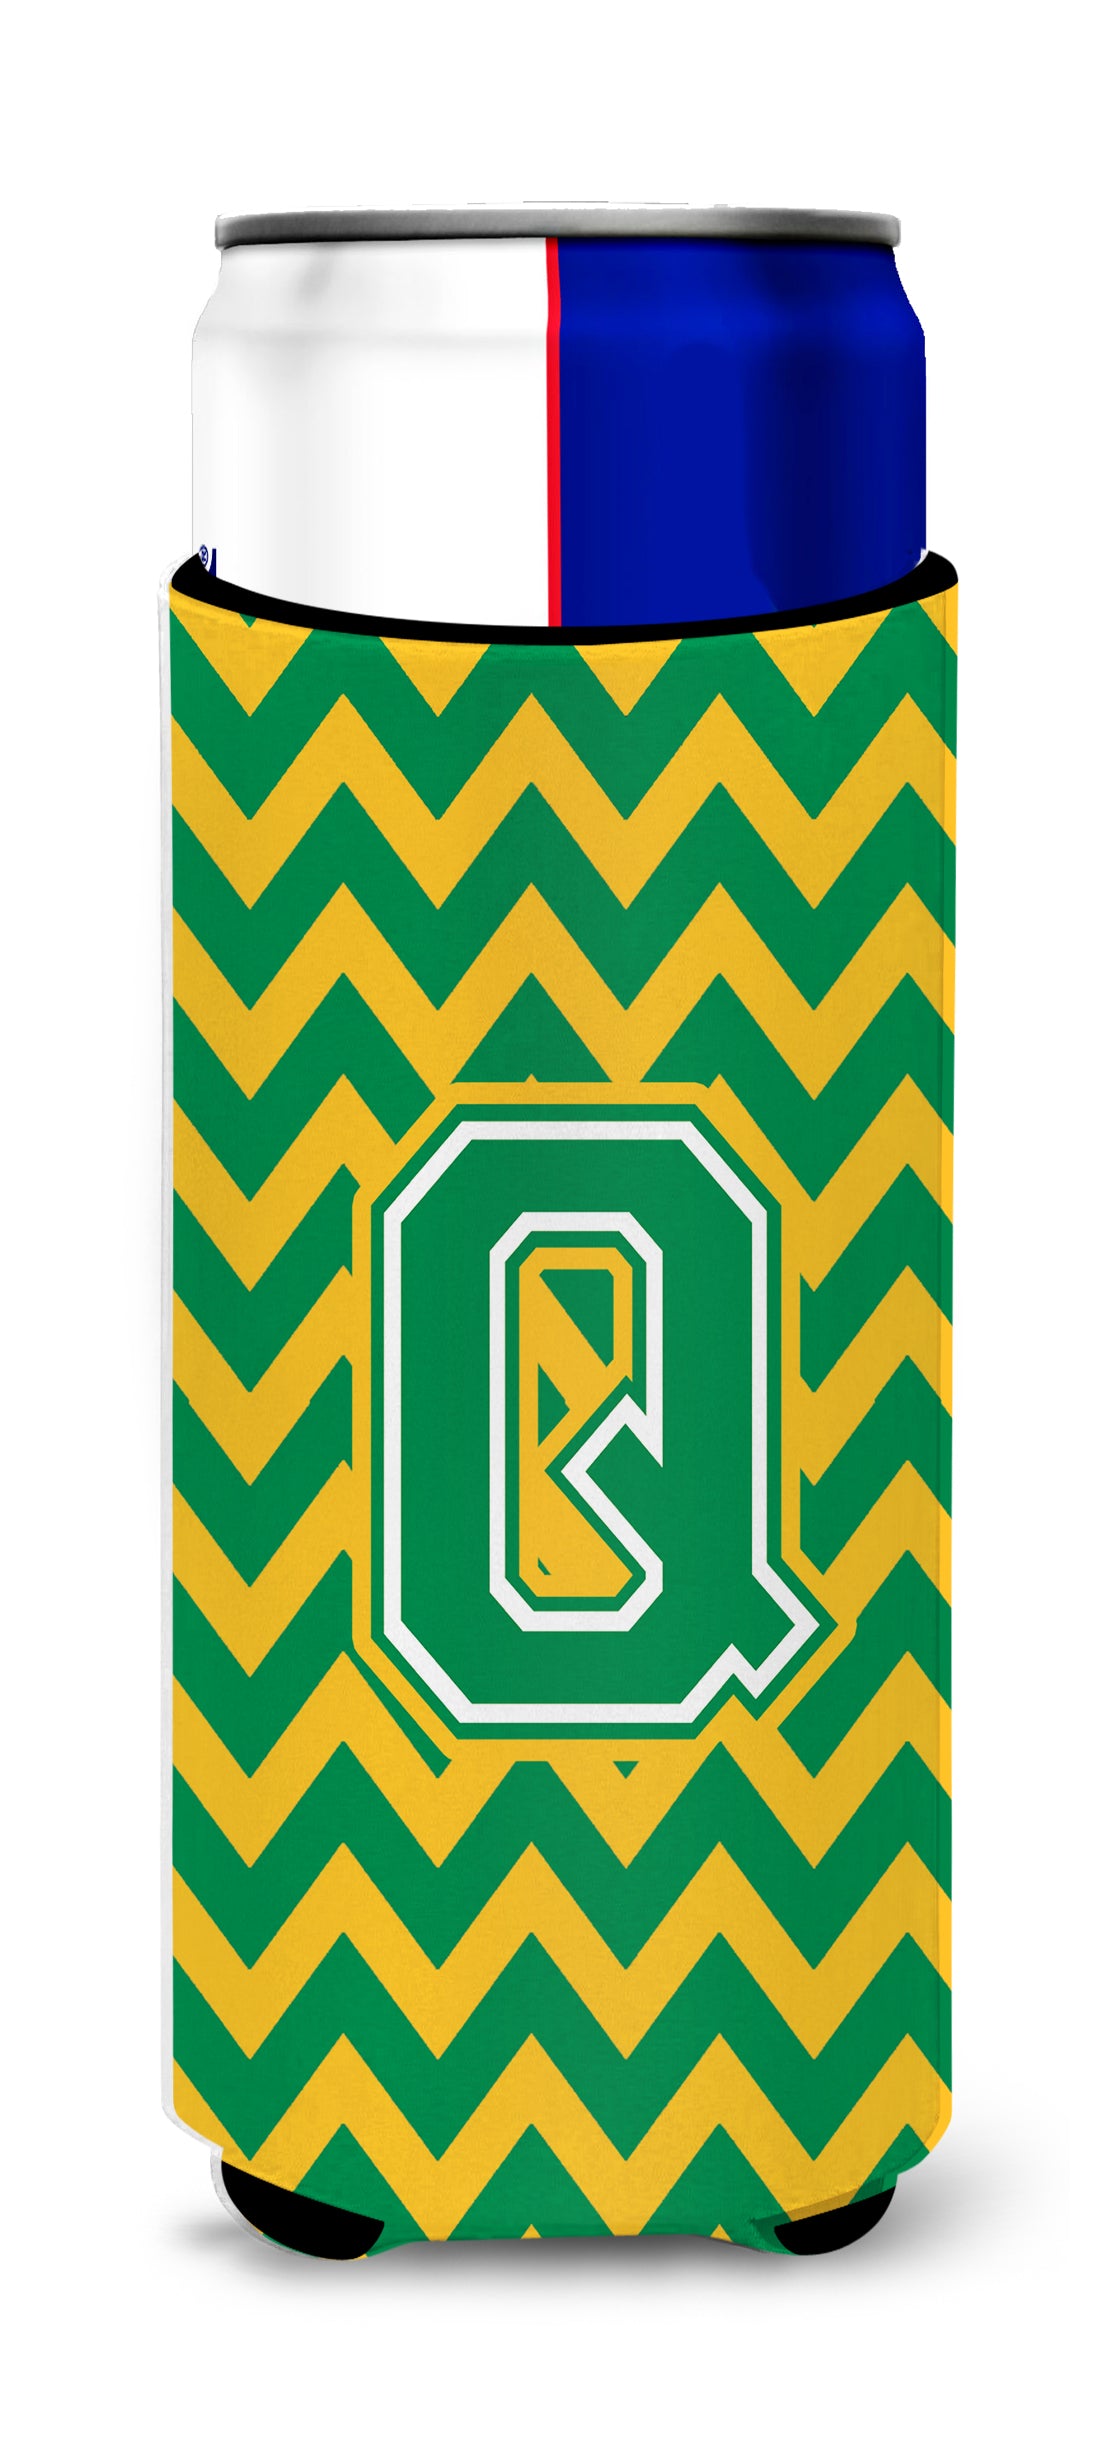 Letter Q Chevron Green and Gold Ultra Beverage Insulators for slim cans CJ1059-QMUK.